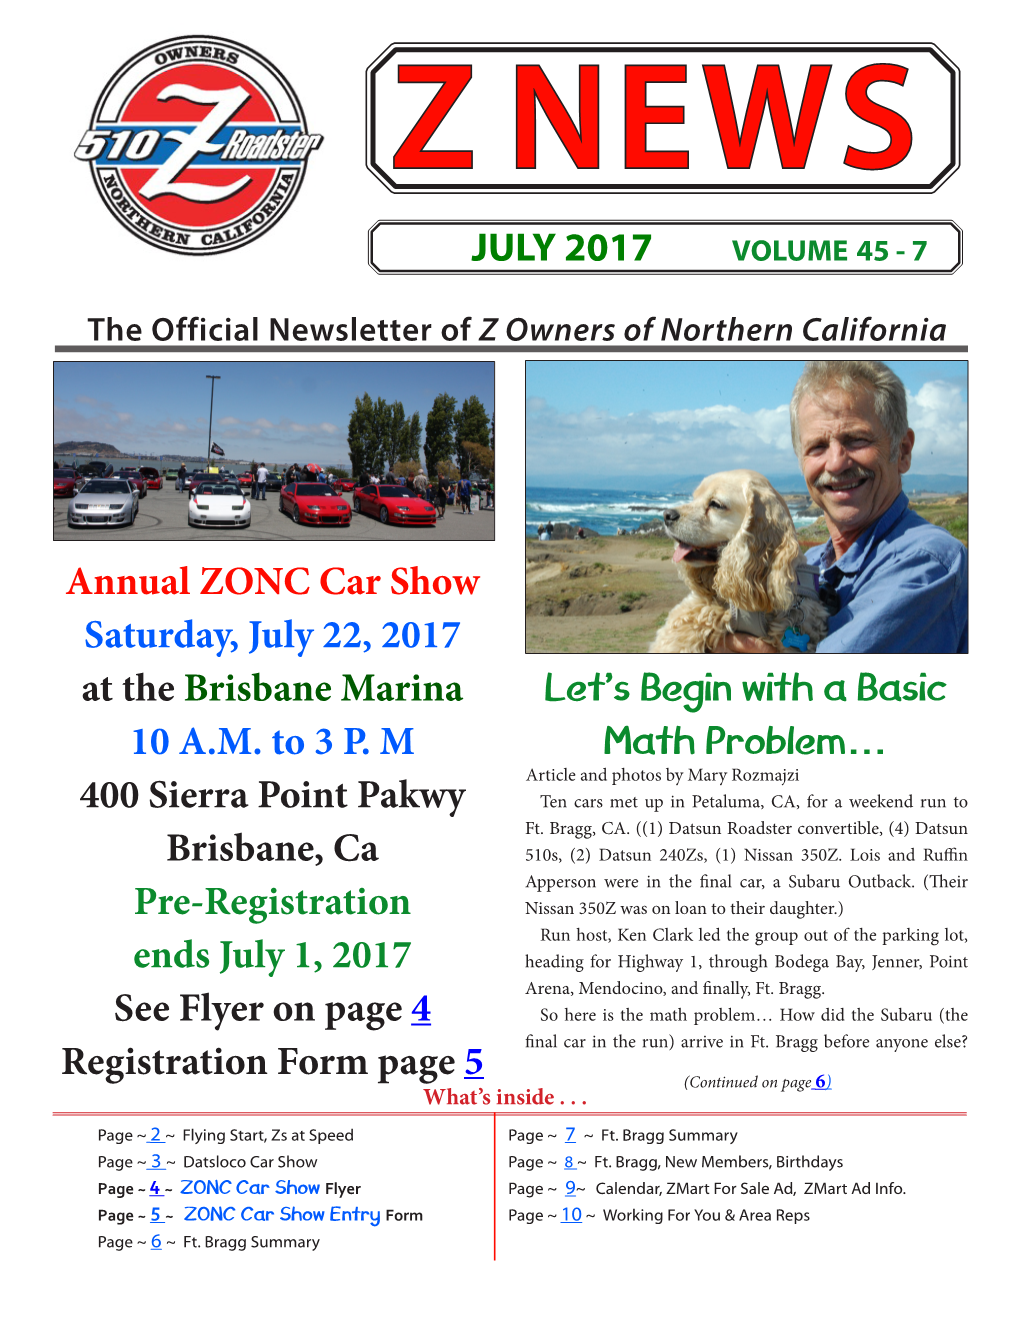 JULY 2017 Annual ZONC Car Show